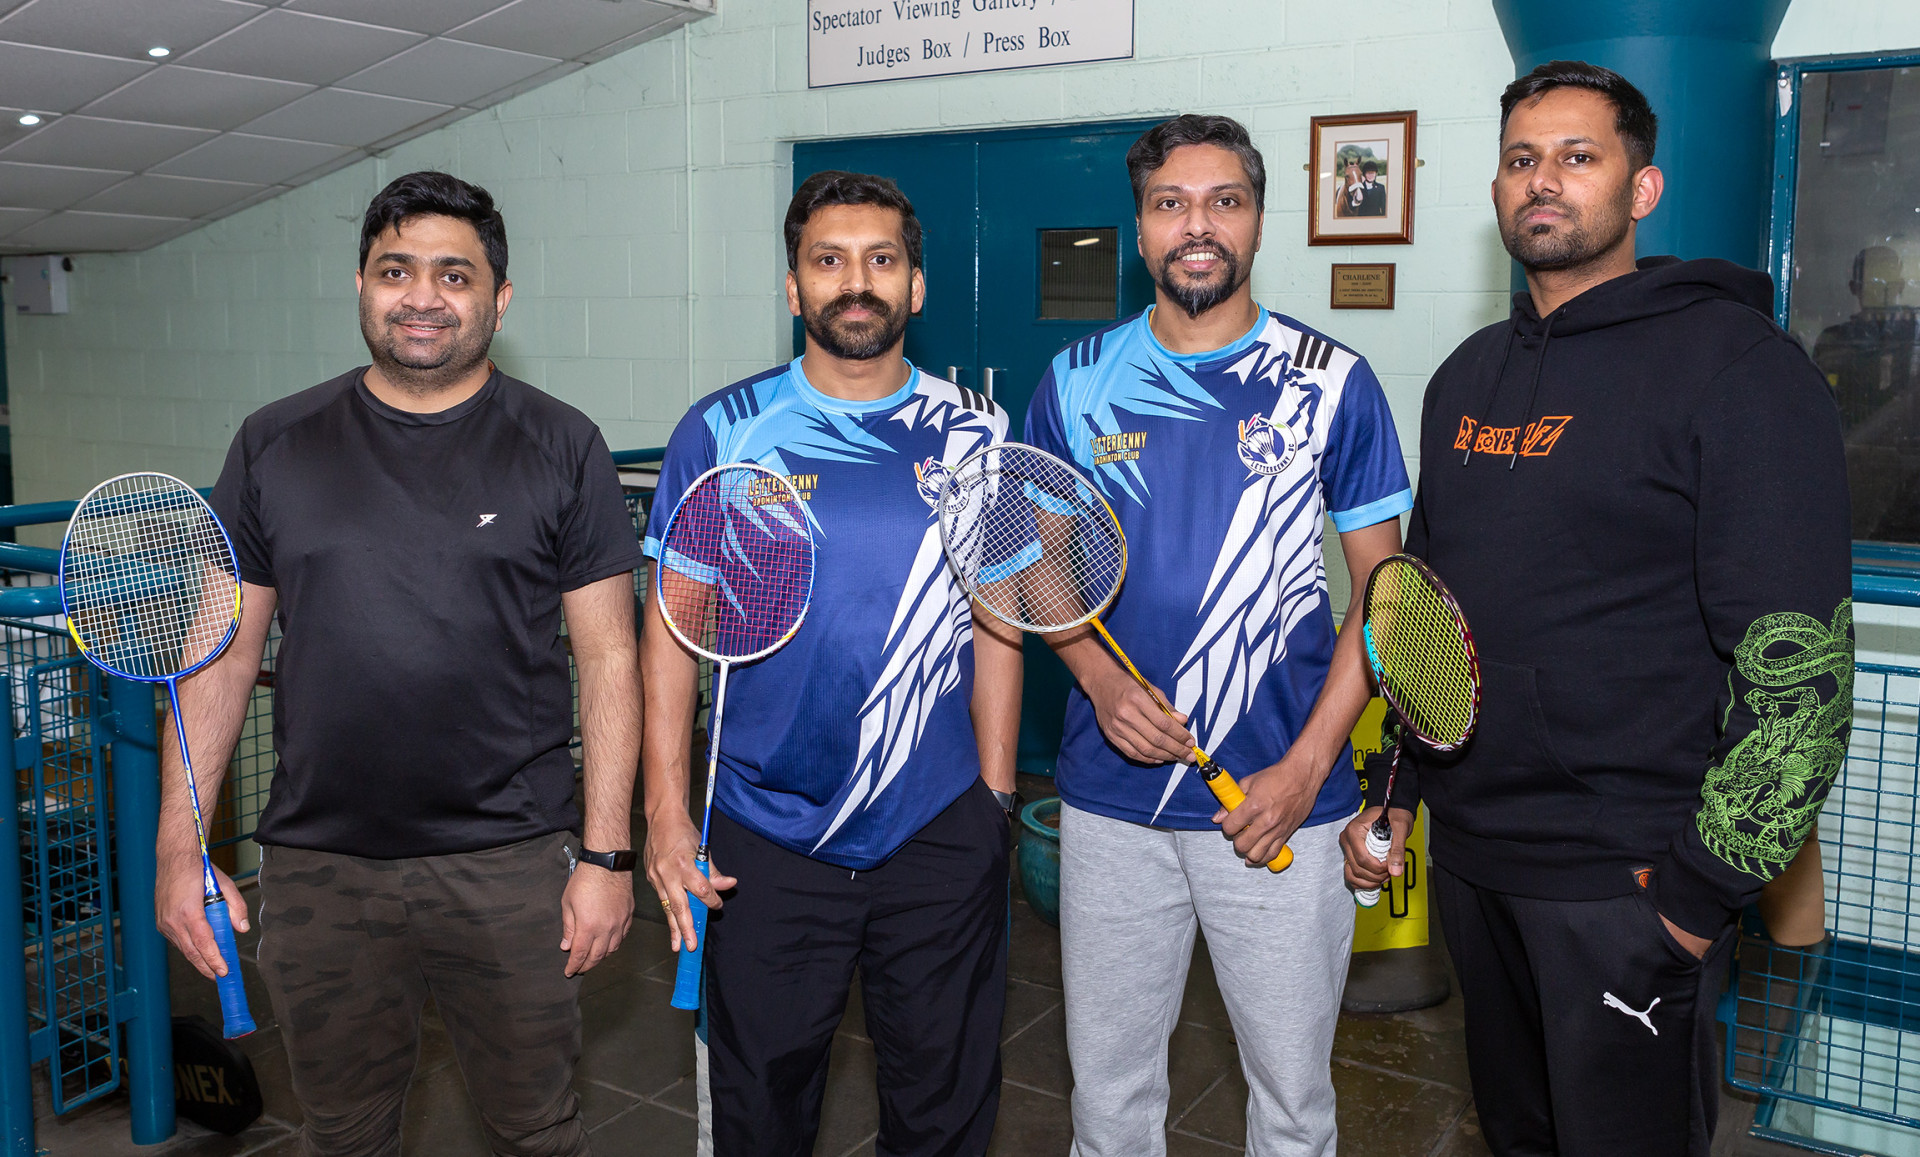 Close matches and late nights as players battle for honours